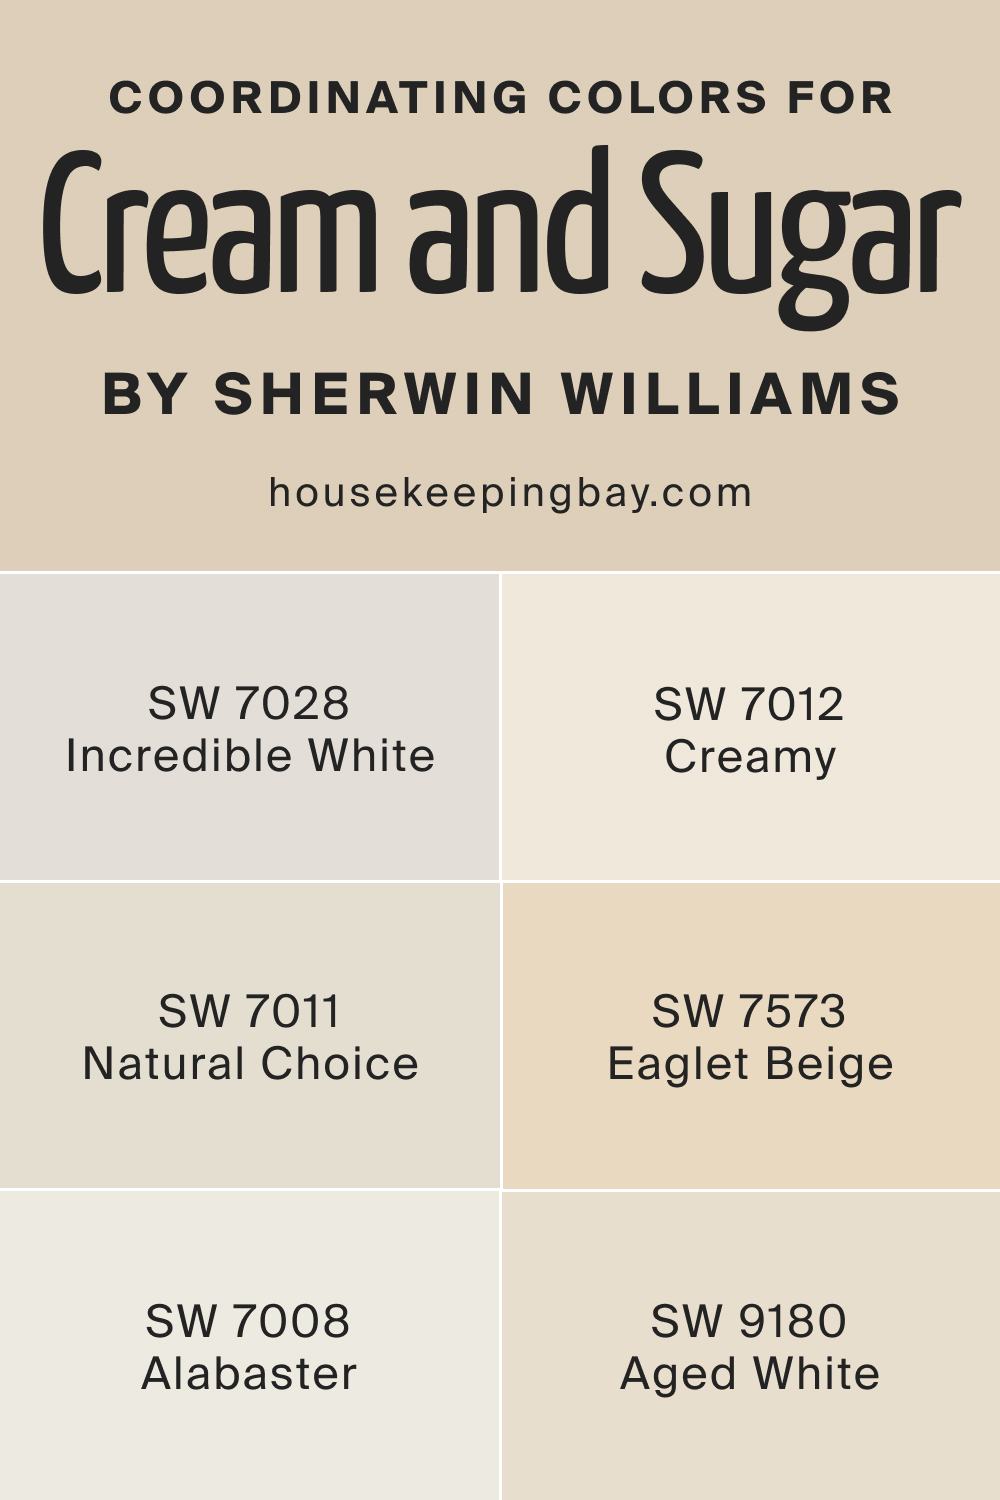 Coordinating Colors for SW 9507 Cream and Sugar by Sherwin Williams